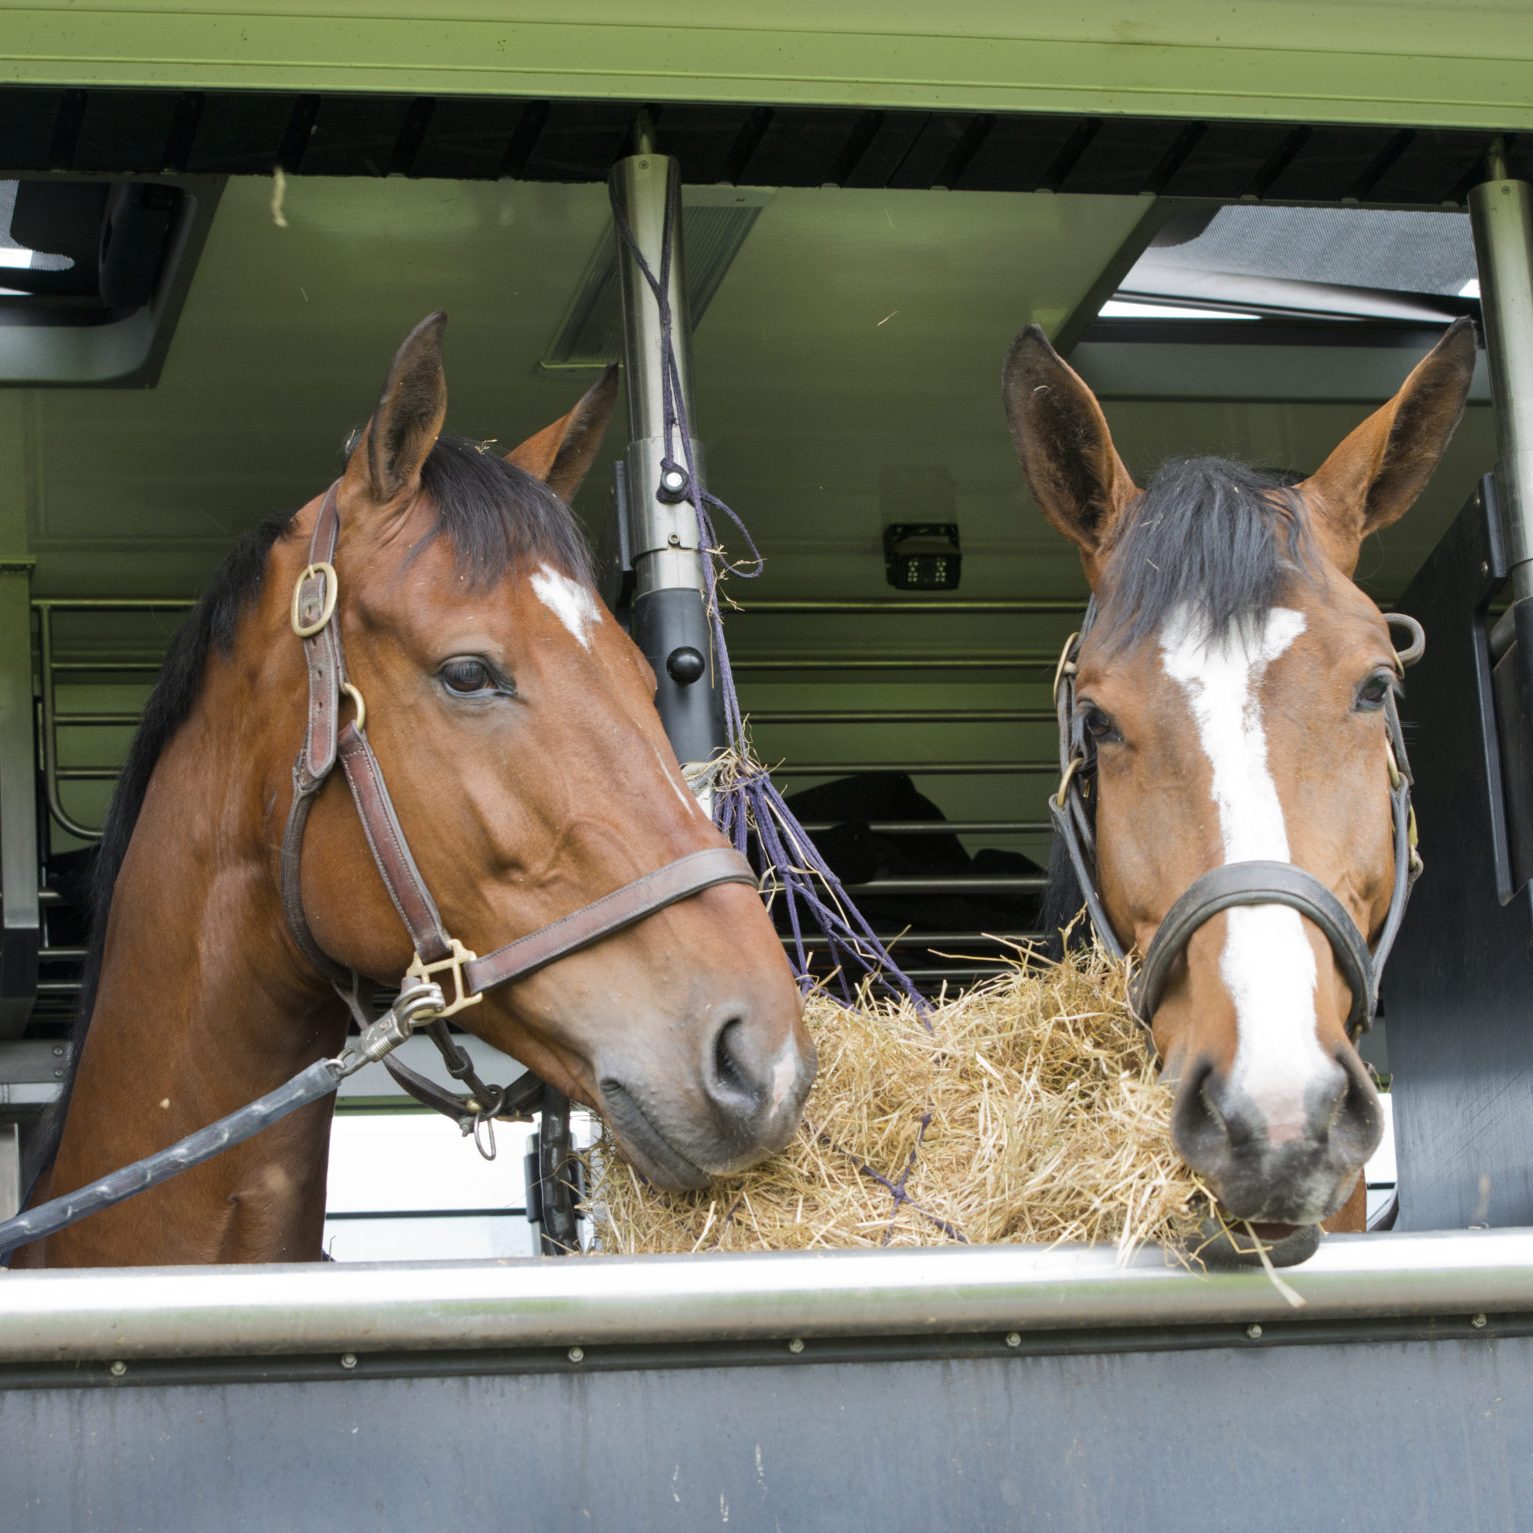 horses eating of a feedbag hanging in a trailer